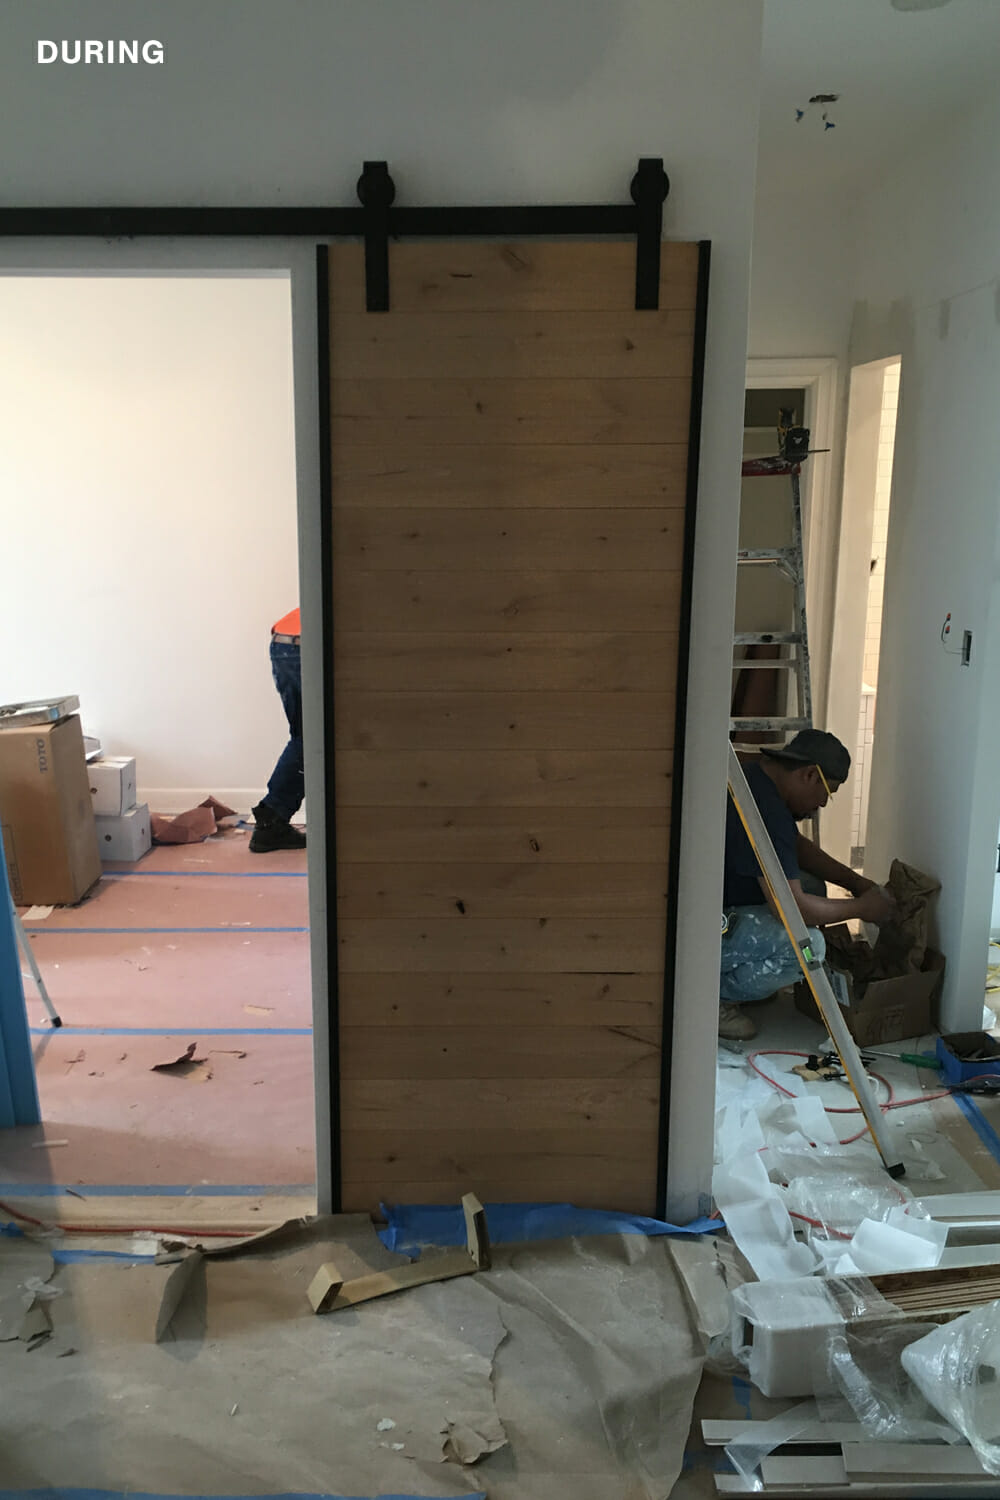 men at work in a room with barndoor during renovation 